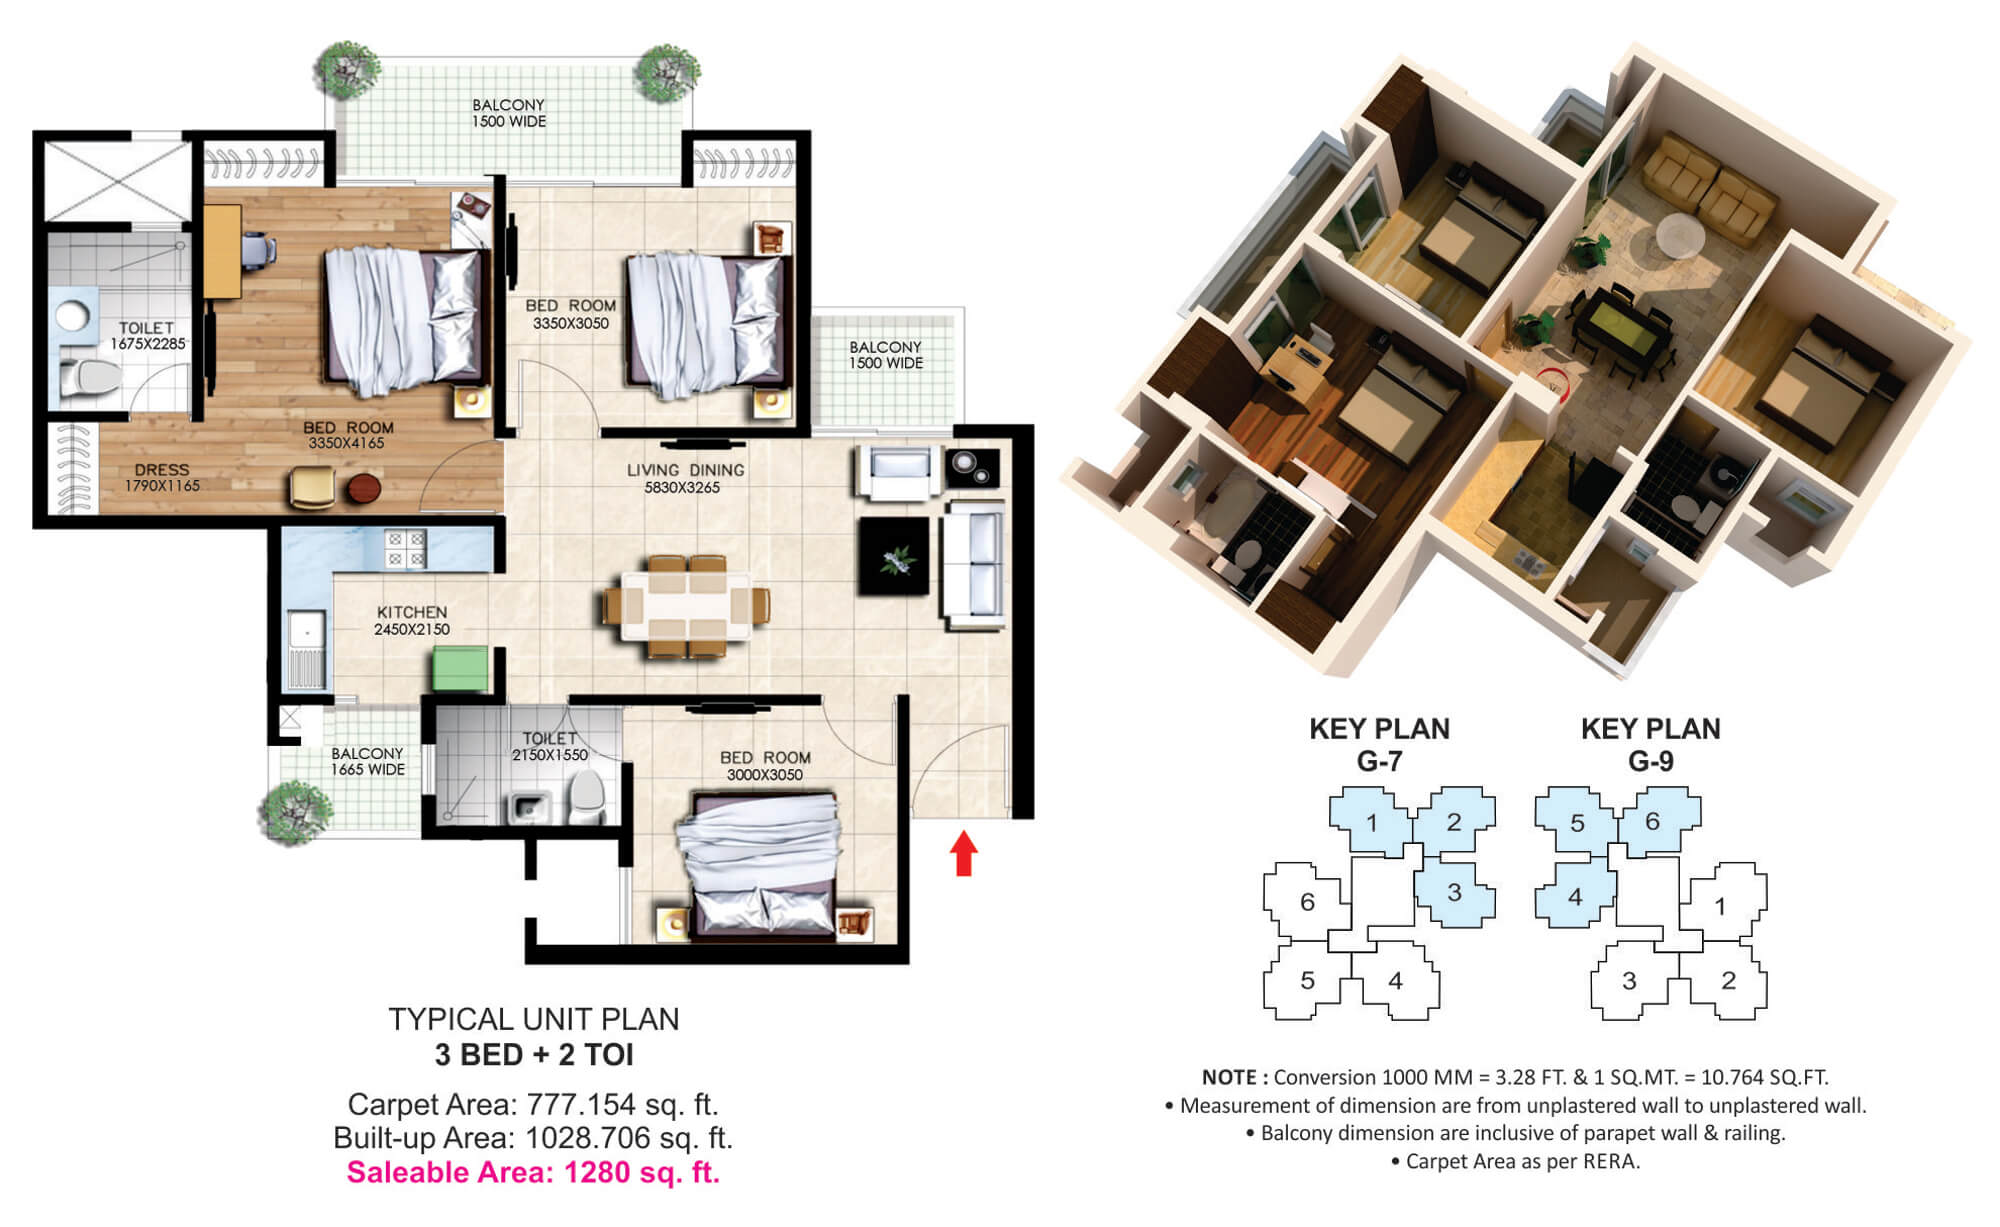 The floor plan size of 3 BHK Flat is 1280 sq ft.